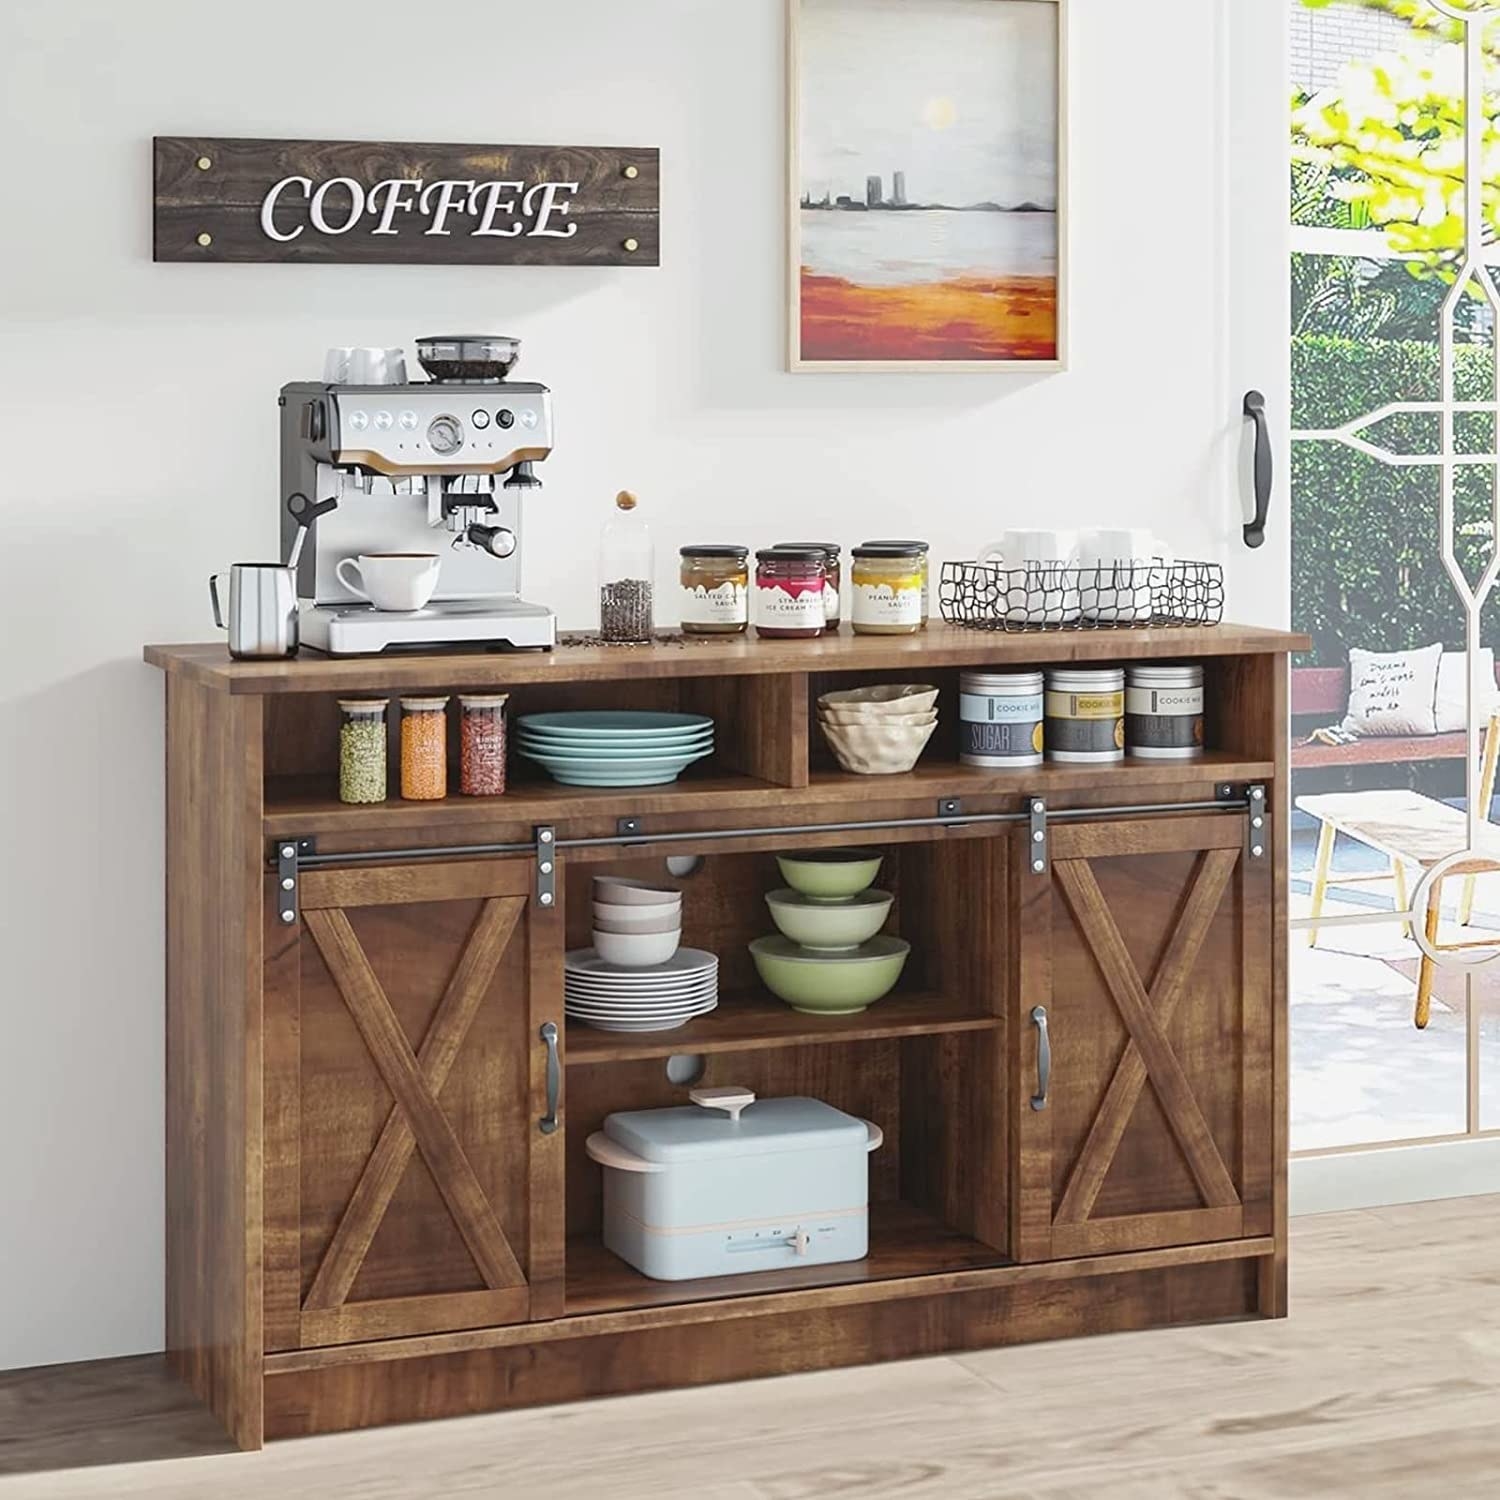 cabinet being used as a coffee bar